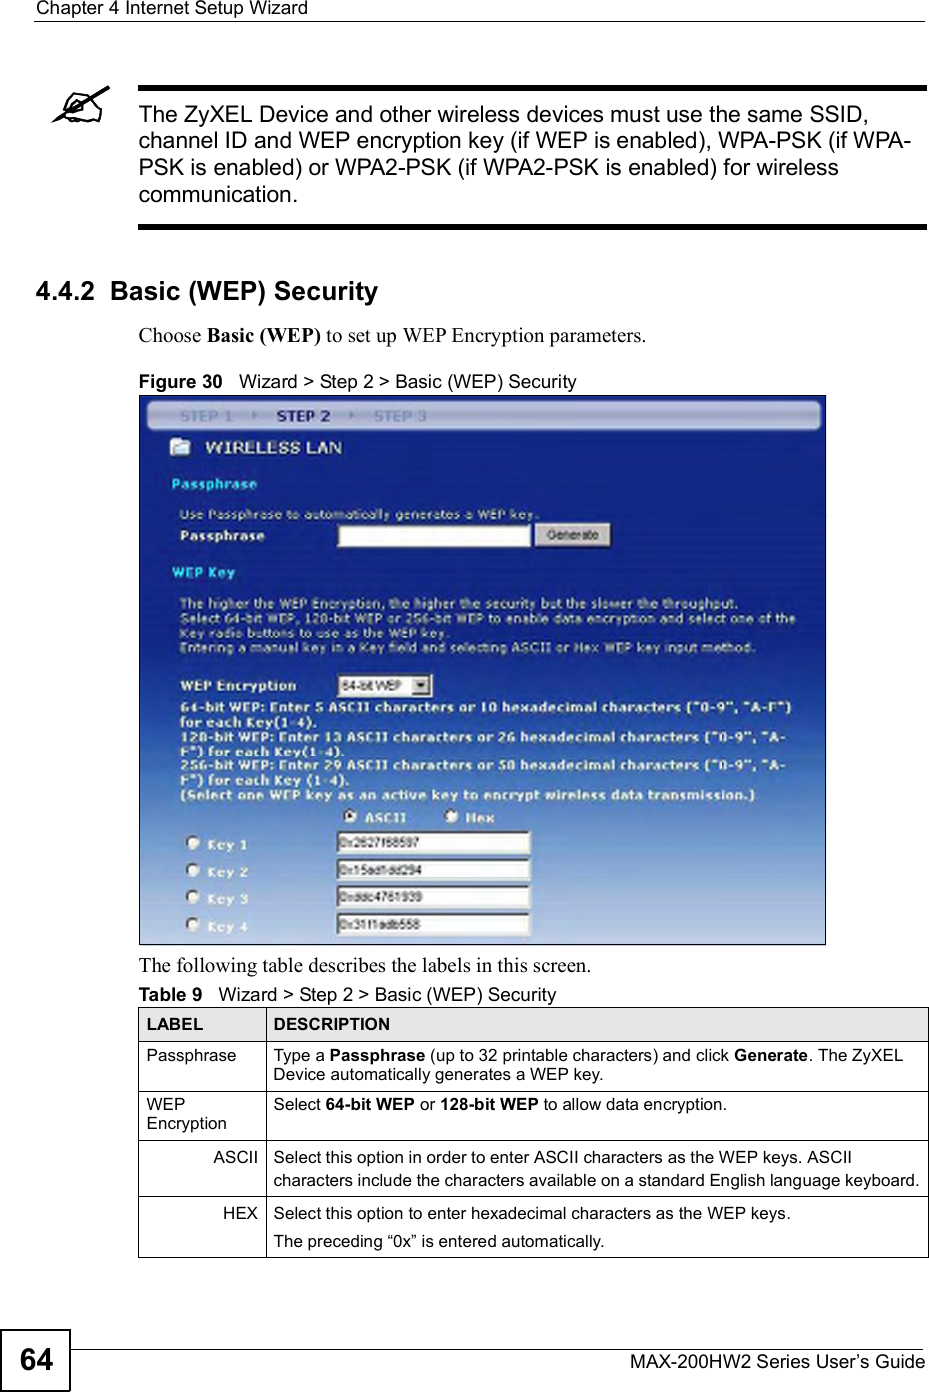 Chapter 4Internet Setup WizardMAX-200HW2 Series User s Guide64The ZyXEL Device and other wireless devices must use the same SSID, channel ID and WEP encryption key (if WEP is enabled), WPA-PSK (if WPA-PSK is enabled) or WPA2-PSK (if WPA2-PSK is enabled) for wireless communication.4.4.2  Basic (WEP) SecurityChoose Basic (WEP) to set up WEP Encryption parameters.Figure 30   Wizard &gt; Step 2 &gt; Basic (WEP) SecurityThe following table describes the labels in this screen.Table 9   Wizard &gt; Step 2 &gt; Basic (WEP) SecurityLABEL DESCRIPTIONPassphrase Type a Passphrase (up to 32 printable characters) and click Generate. The ZyXEL Device automatically generates a WEP key.WEPEncryptionSelect 64-bit WEP or 128-bit WEP to allow data encryption.ASCII Select this option in order to enter ASCII characters as the WEP keys. ASCII characters include the characters available on a standard English language keyboard.HEX Select this option to enter hexadecimal characters as the WEP keys.The preceding !0x&quot; is entered automatically. 